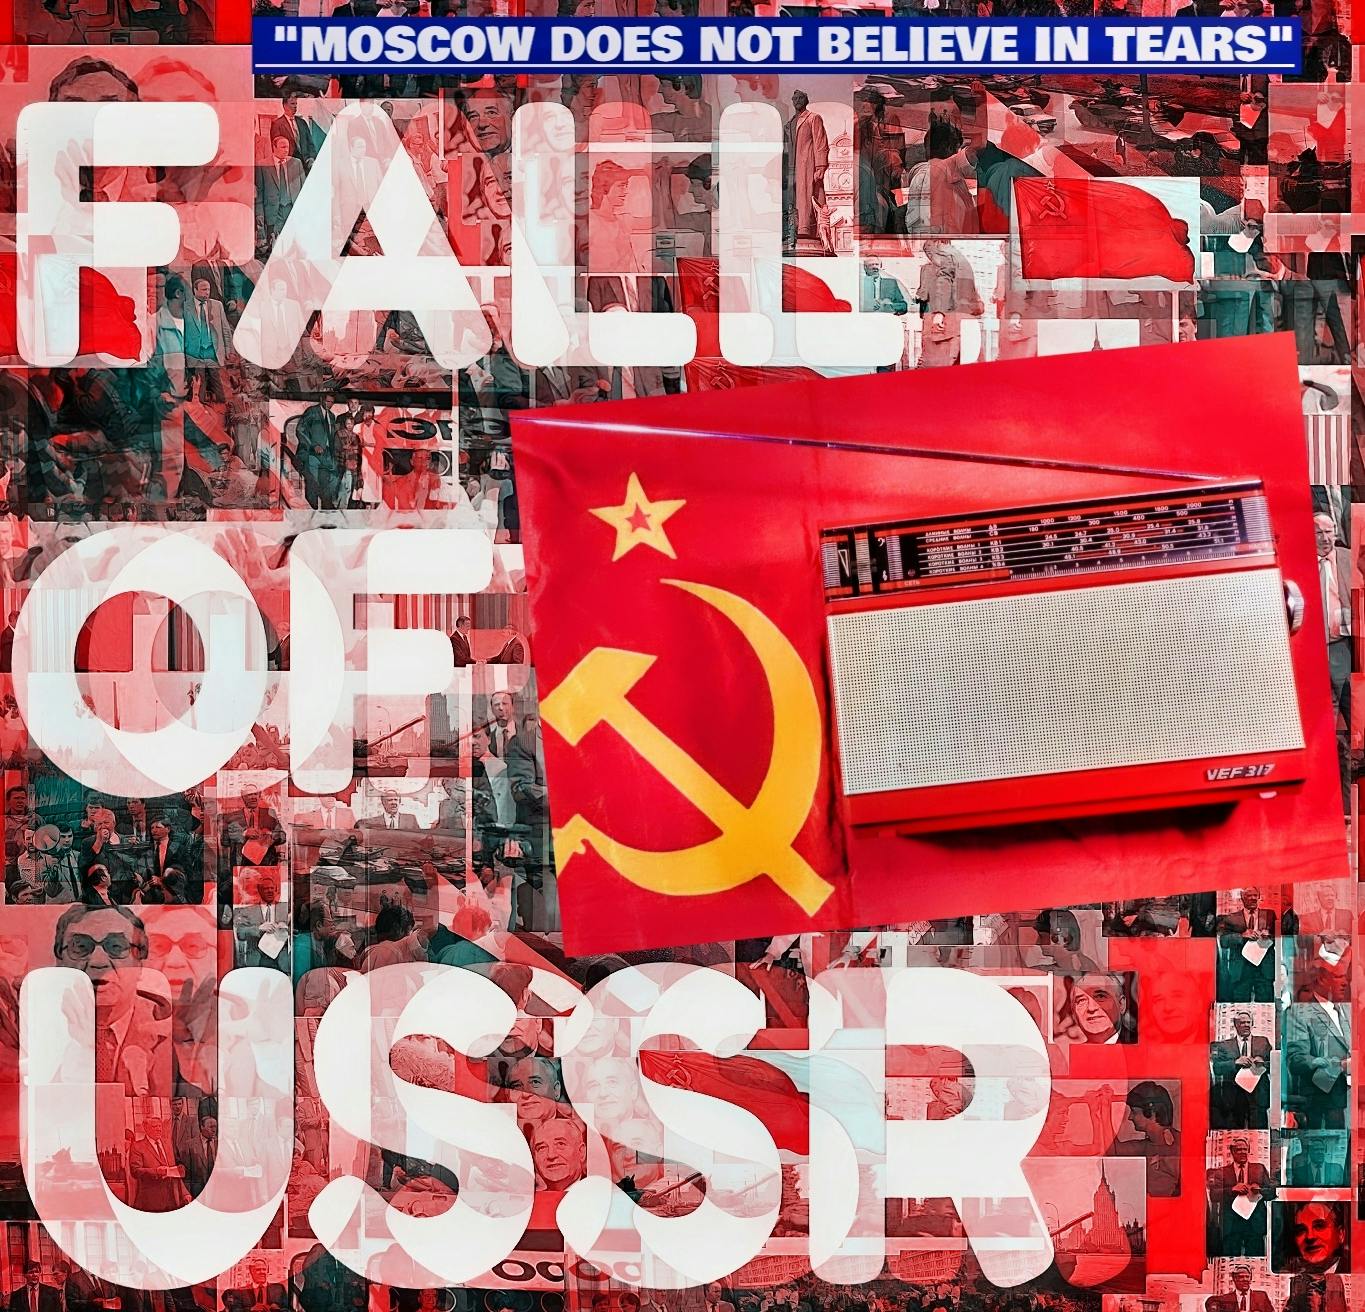 FALL OF USSR: Part 4 - Moscow Does Not Believe in Tears